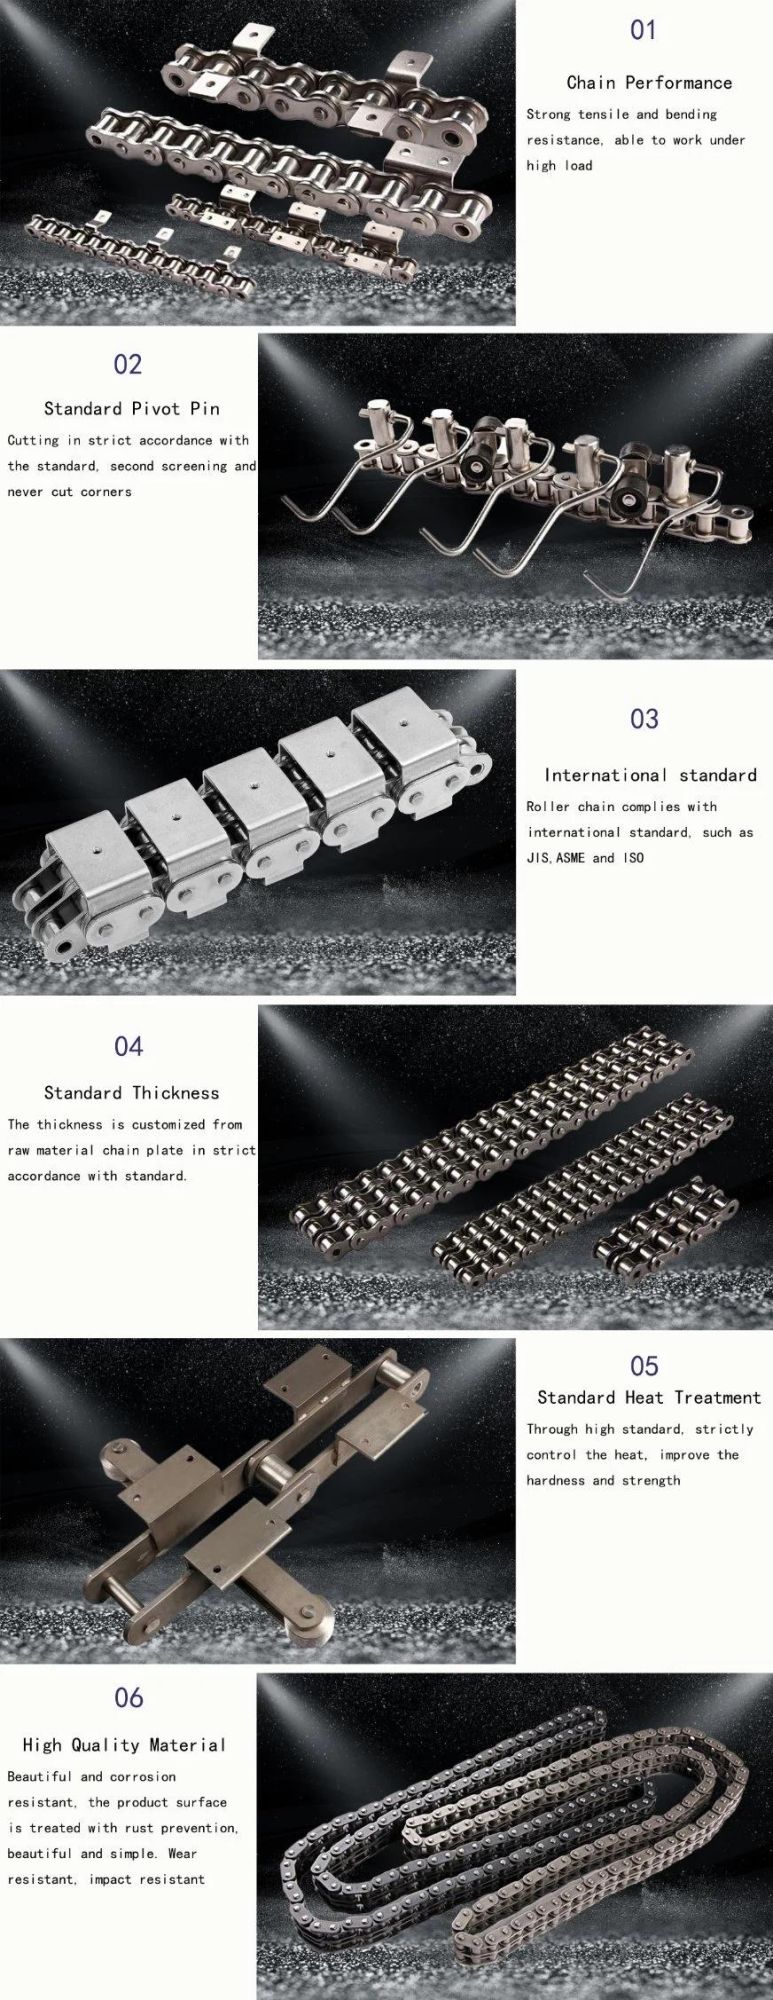 Professional Chains Manufacturer ISO DIN Standard SA-1 Sk-1 Short Pitch Roller Chain with Attachments